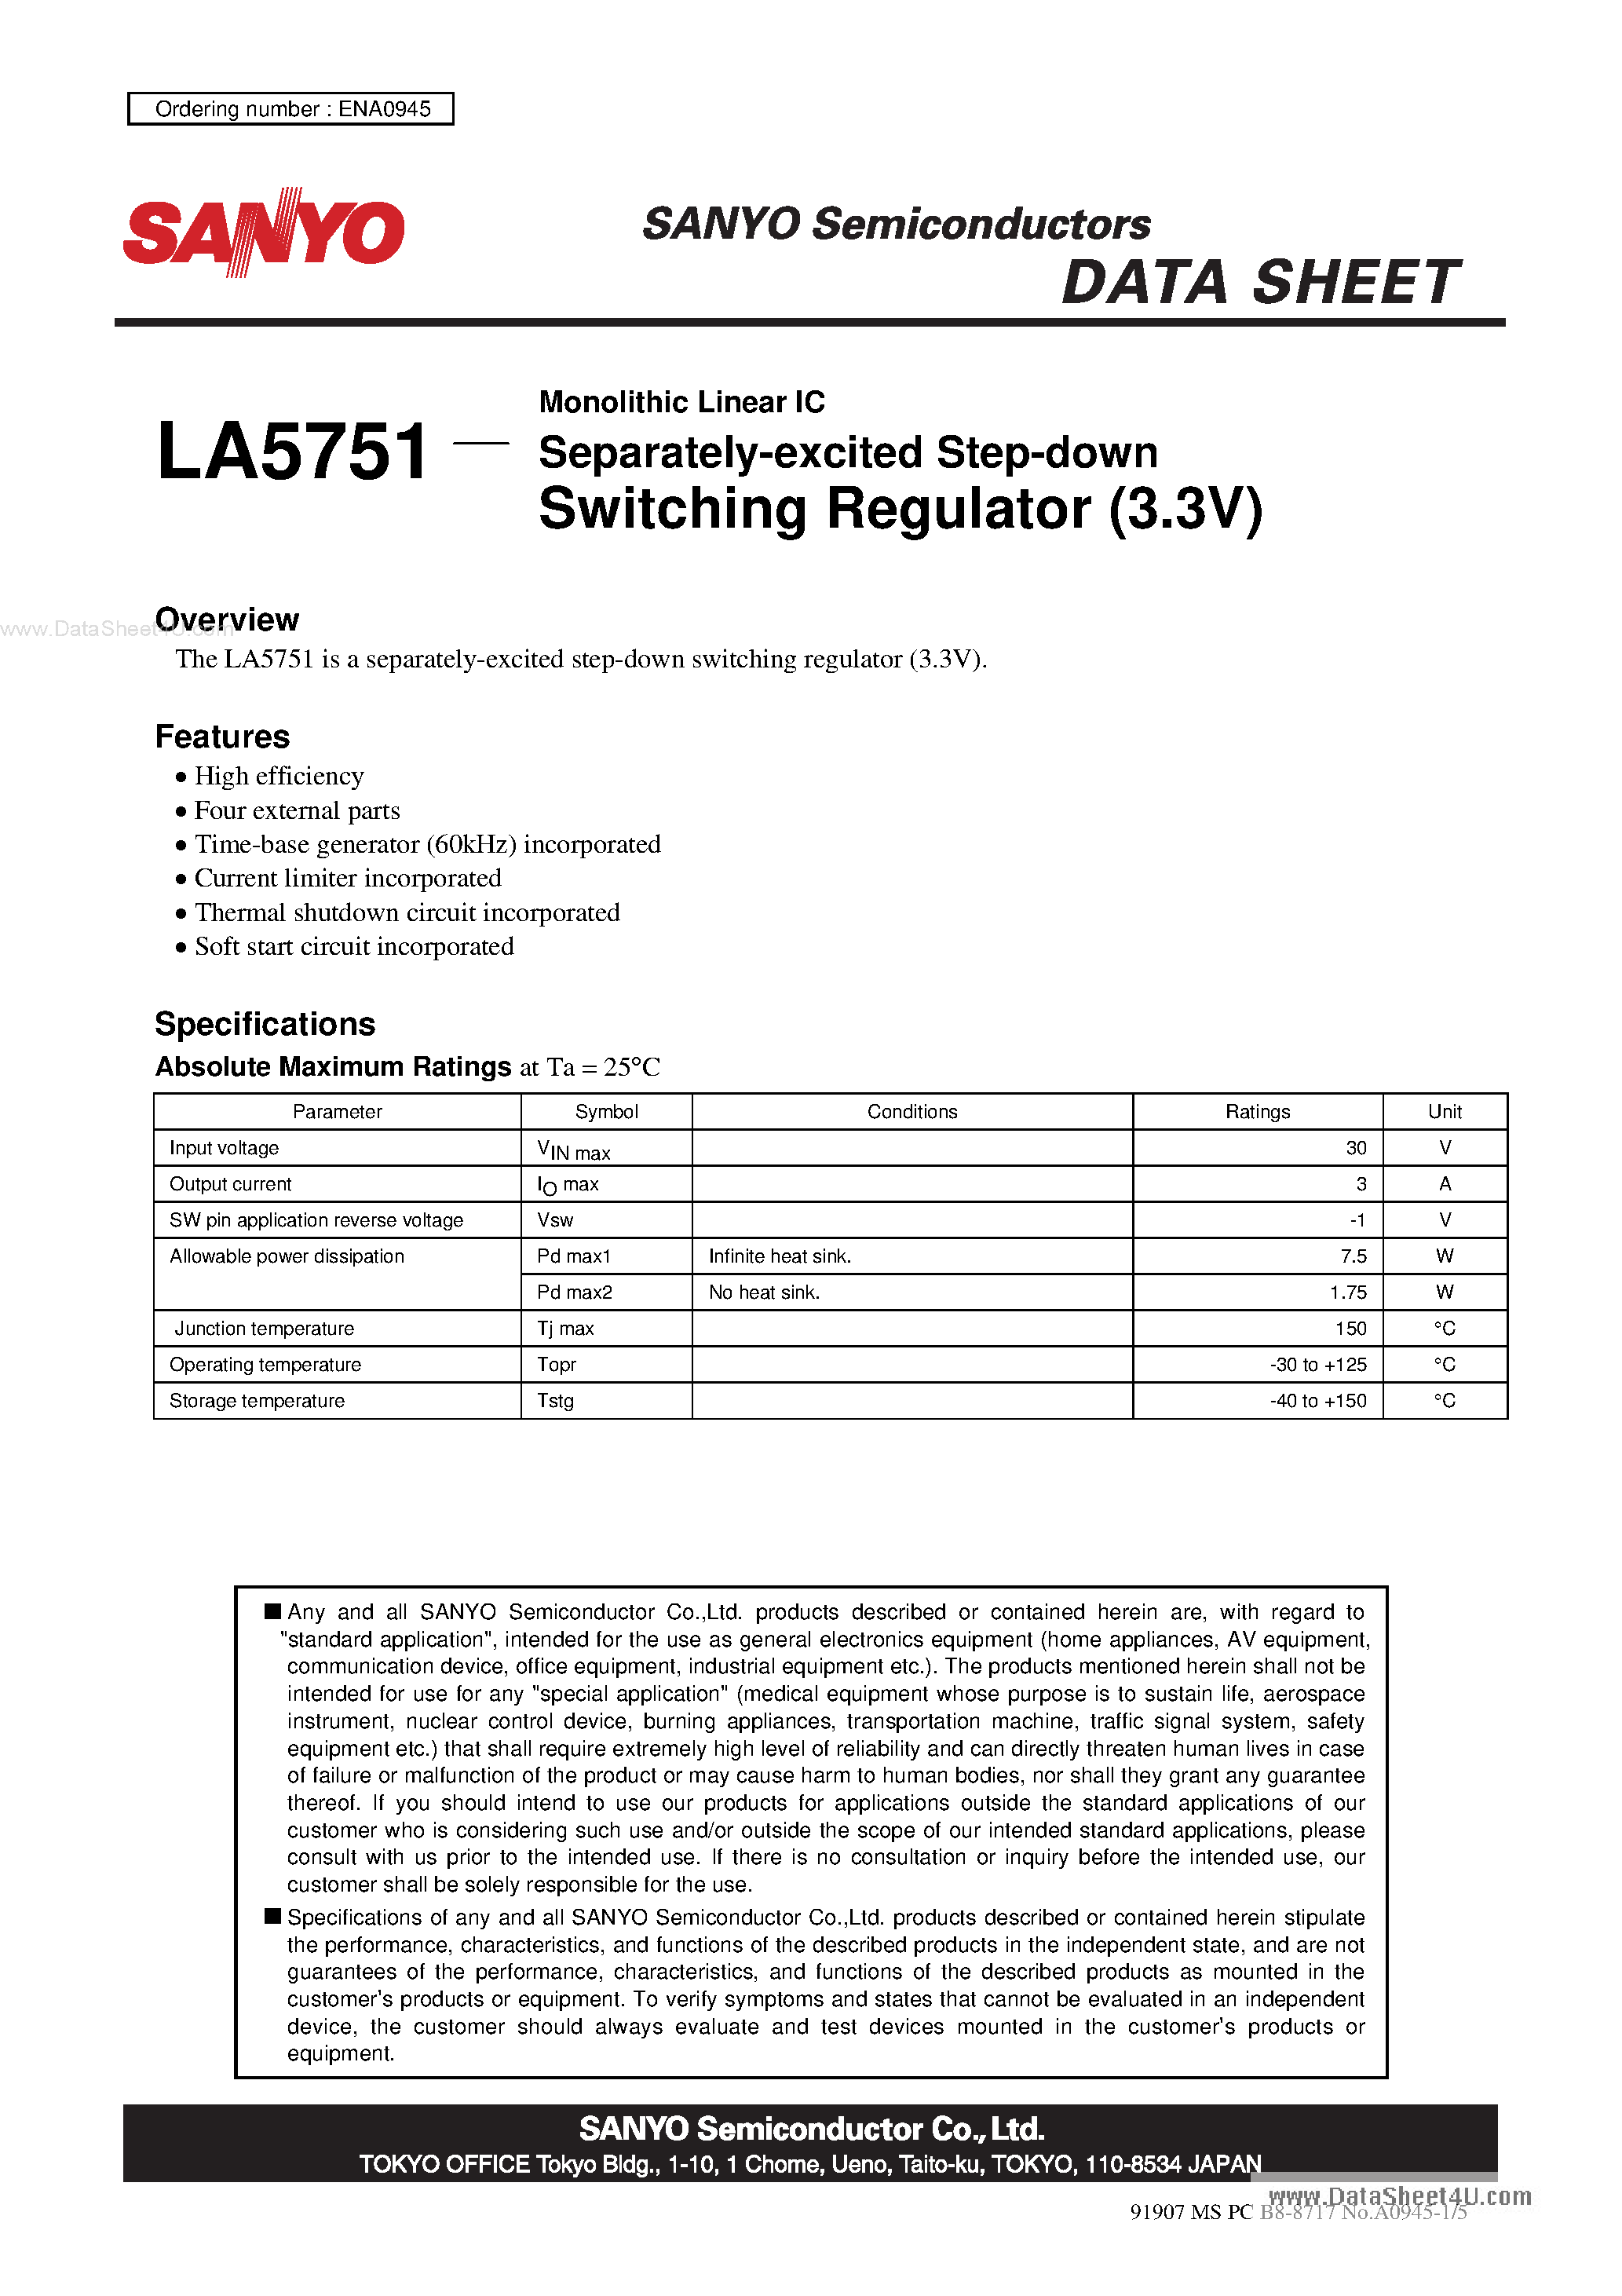 Даташит LA5751-Monolithic Linear IC Separately-Excited Step-Down Switching Regulator страница 1